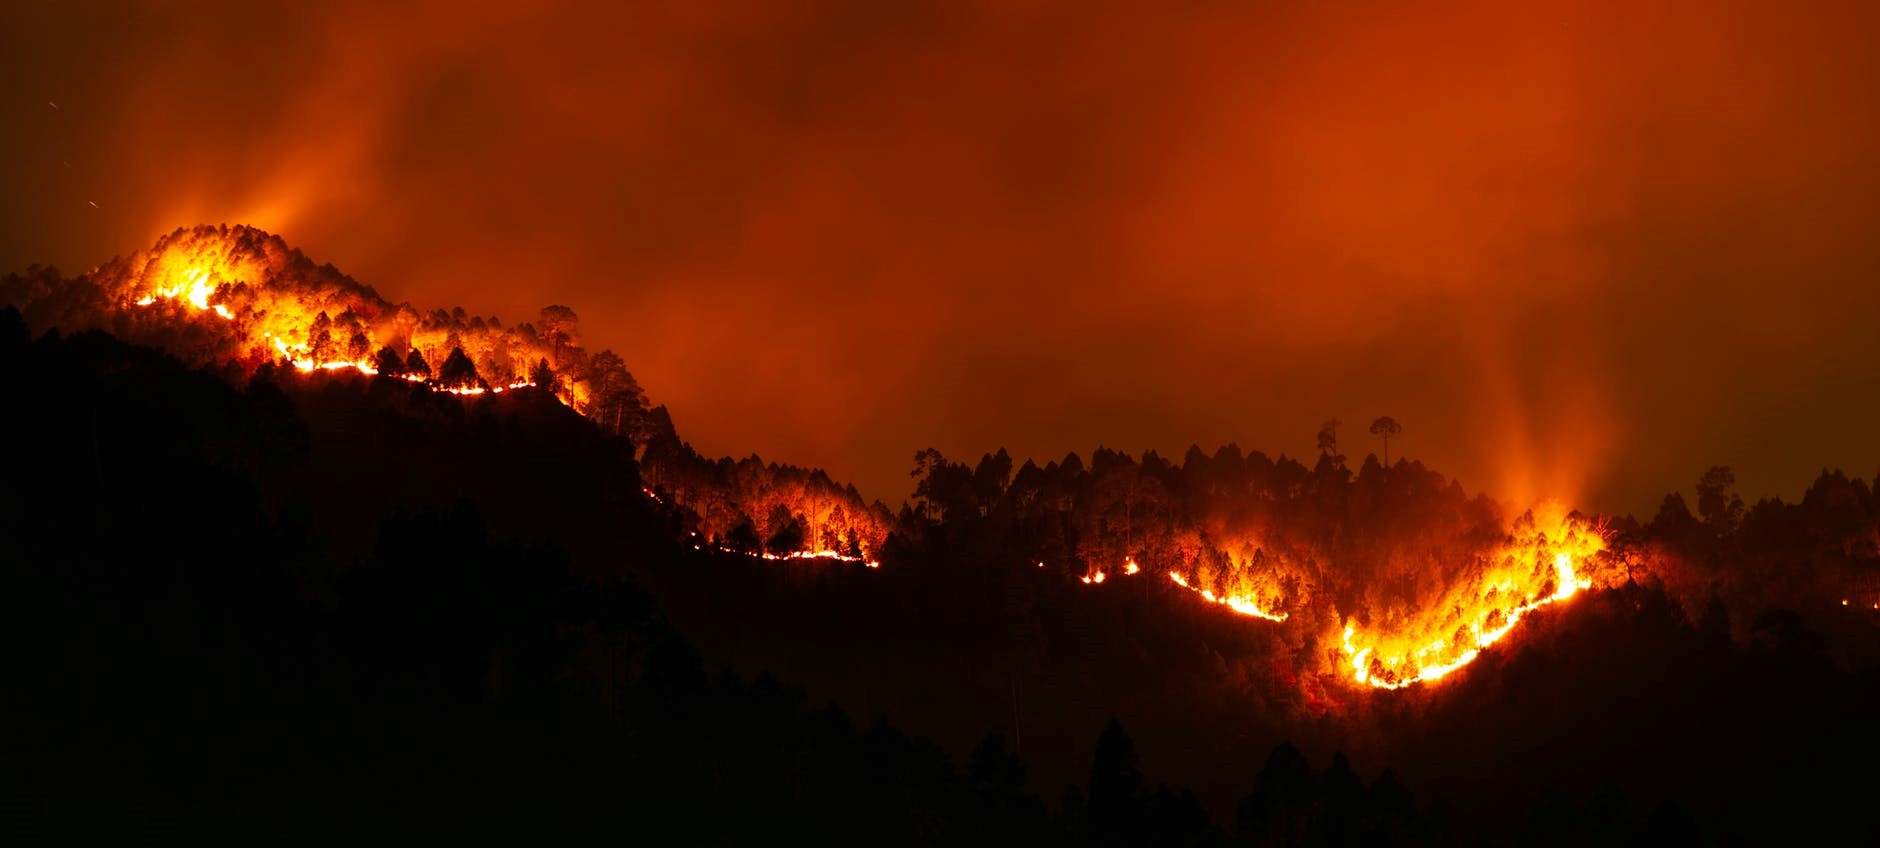 Scene of a major forest fire at night